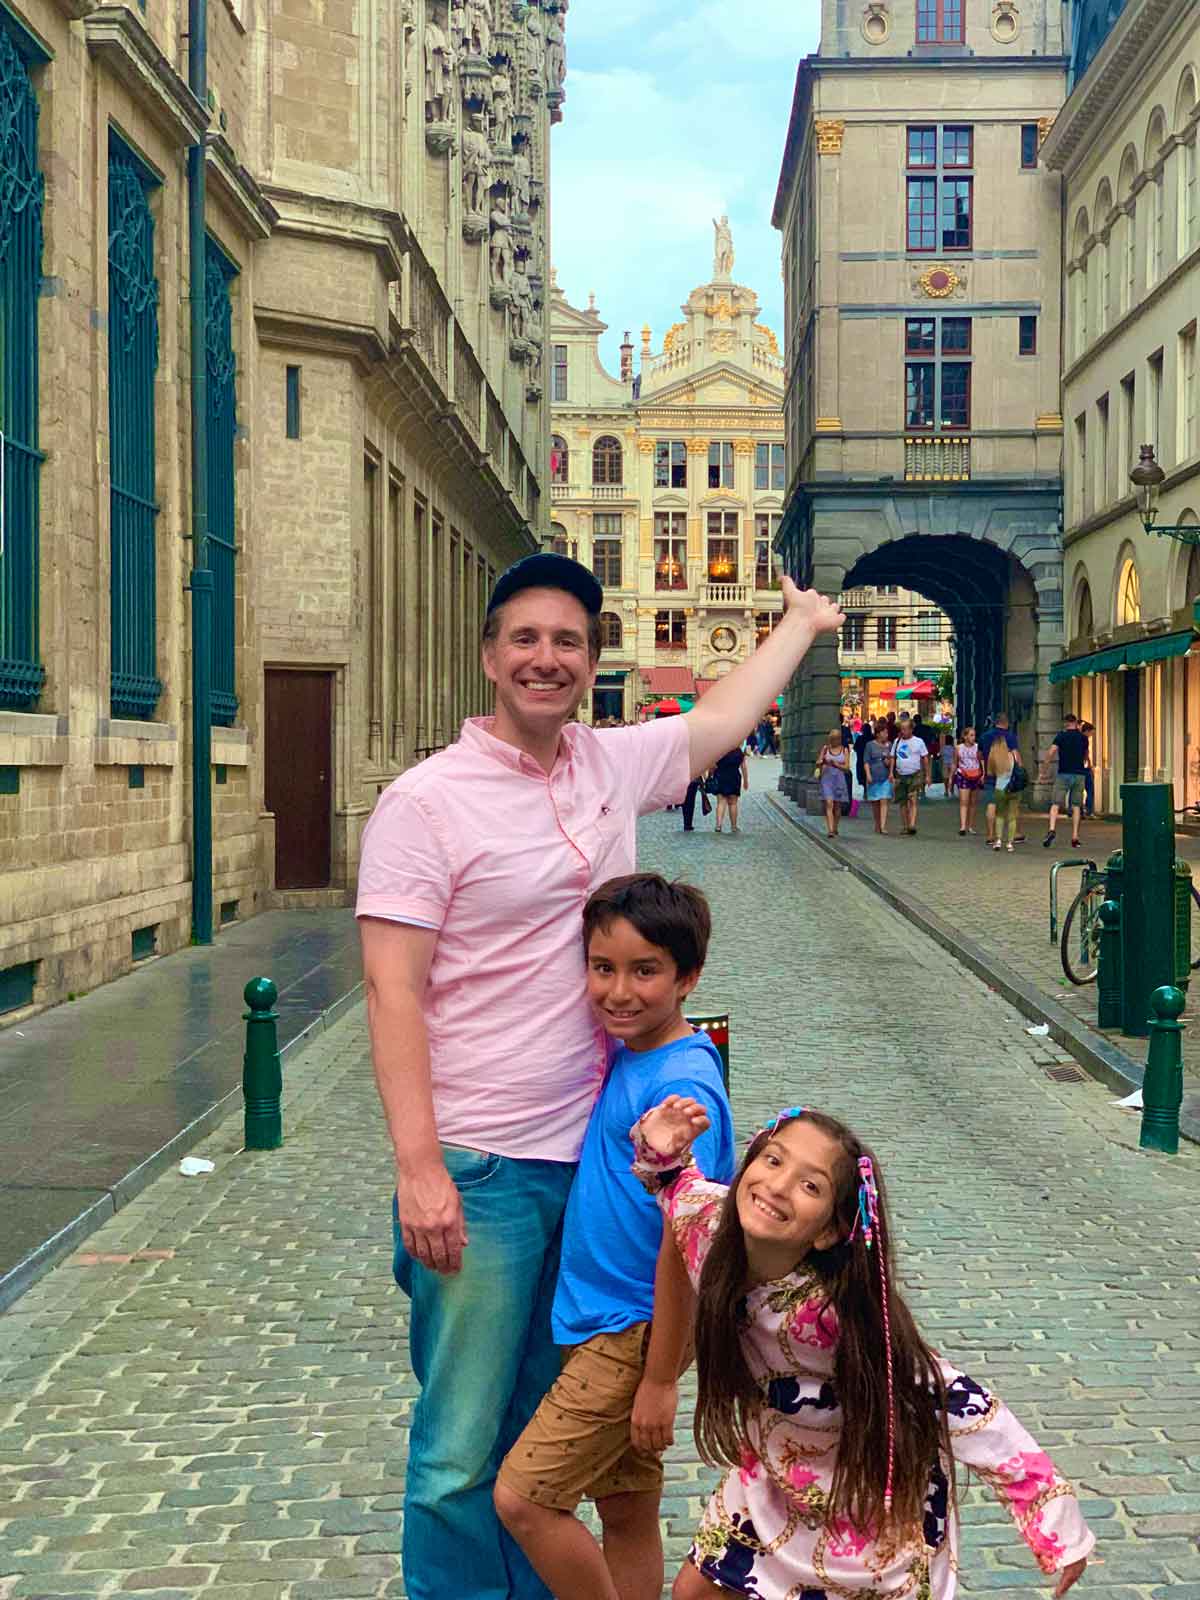 A family explores historic streets in Brussels.